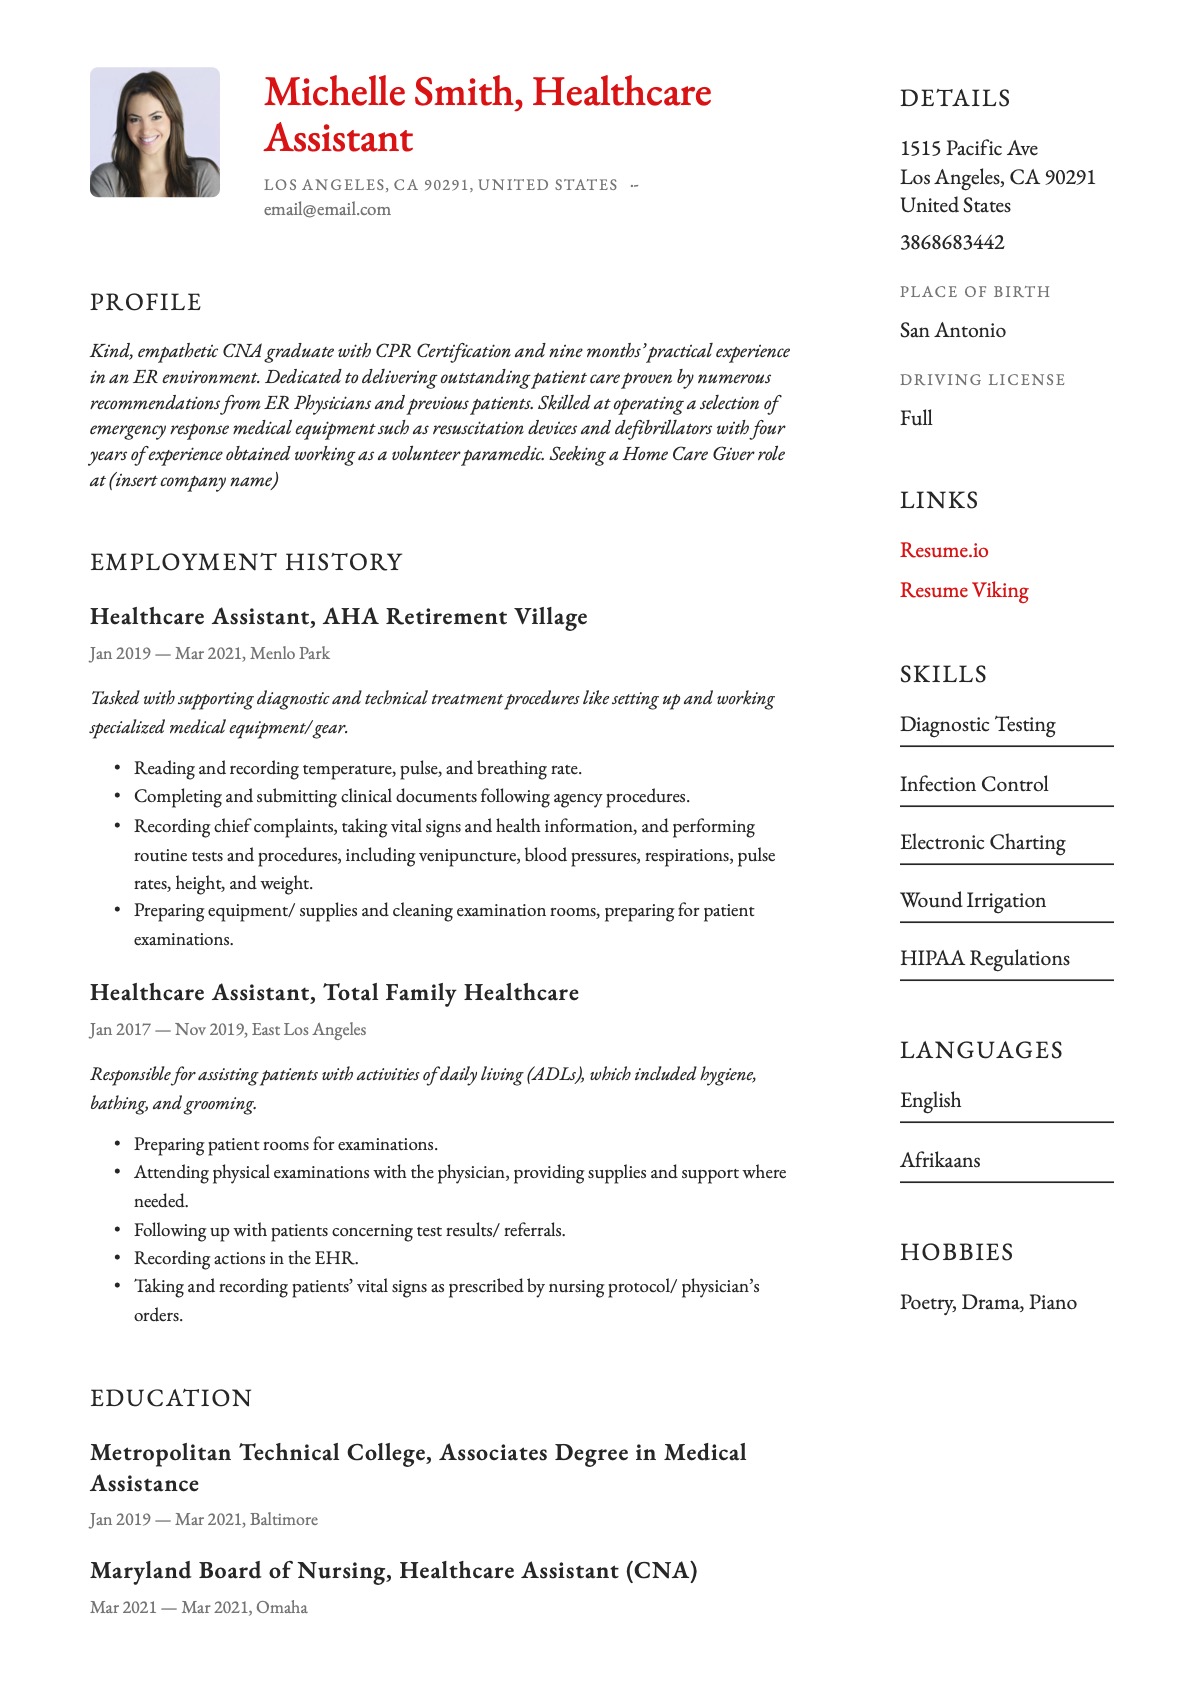 Example Resume Healthcare_Assistant-13